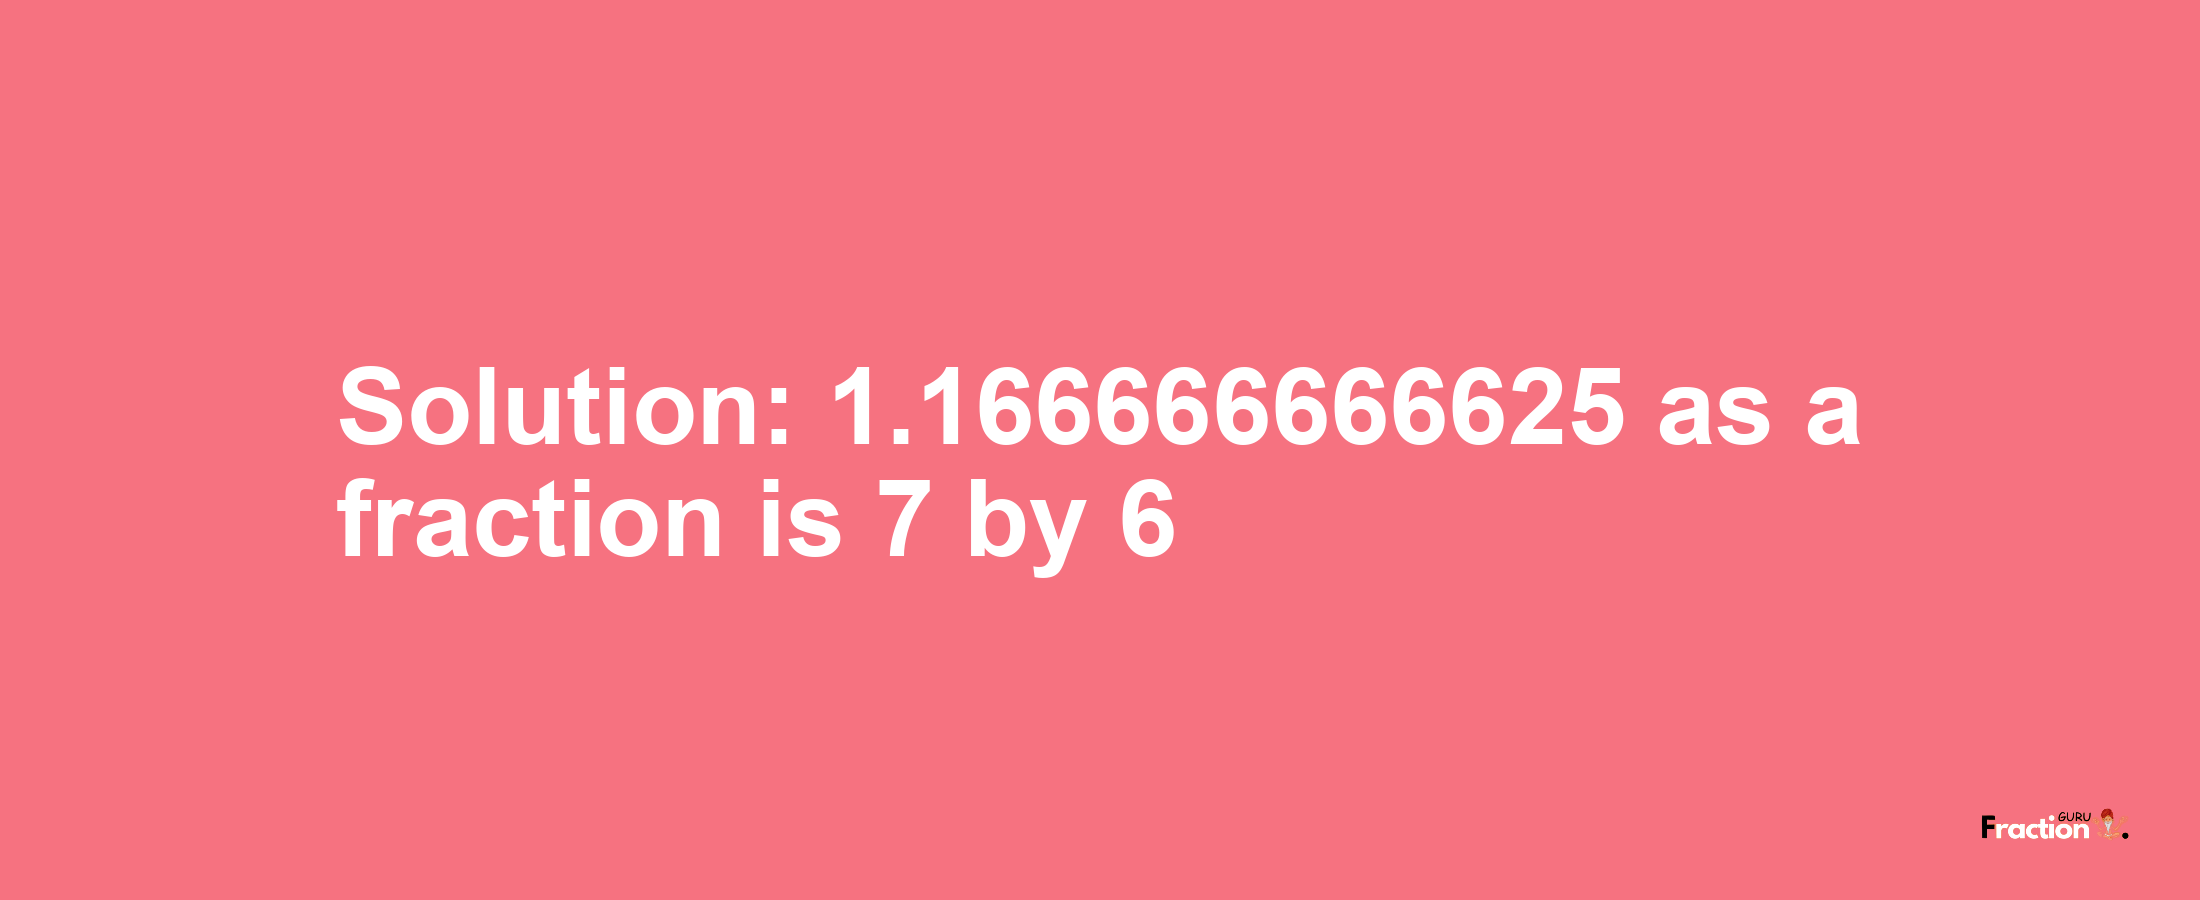 Solution:1.166666666625 as a fraction is 7/6